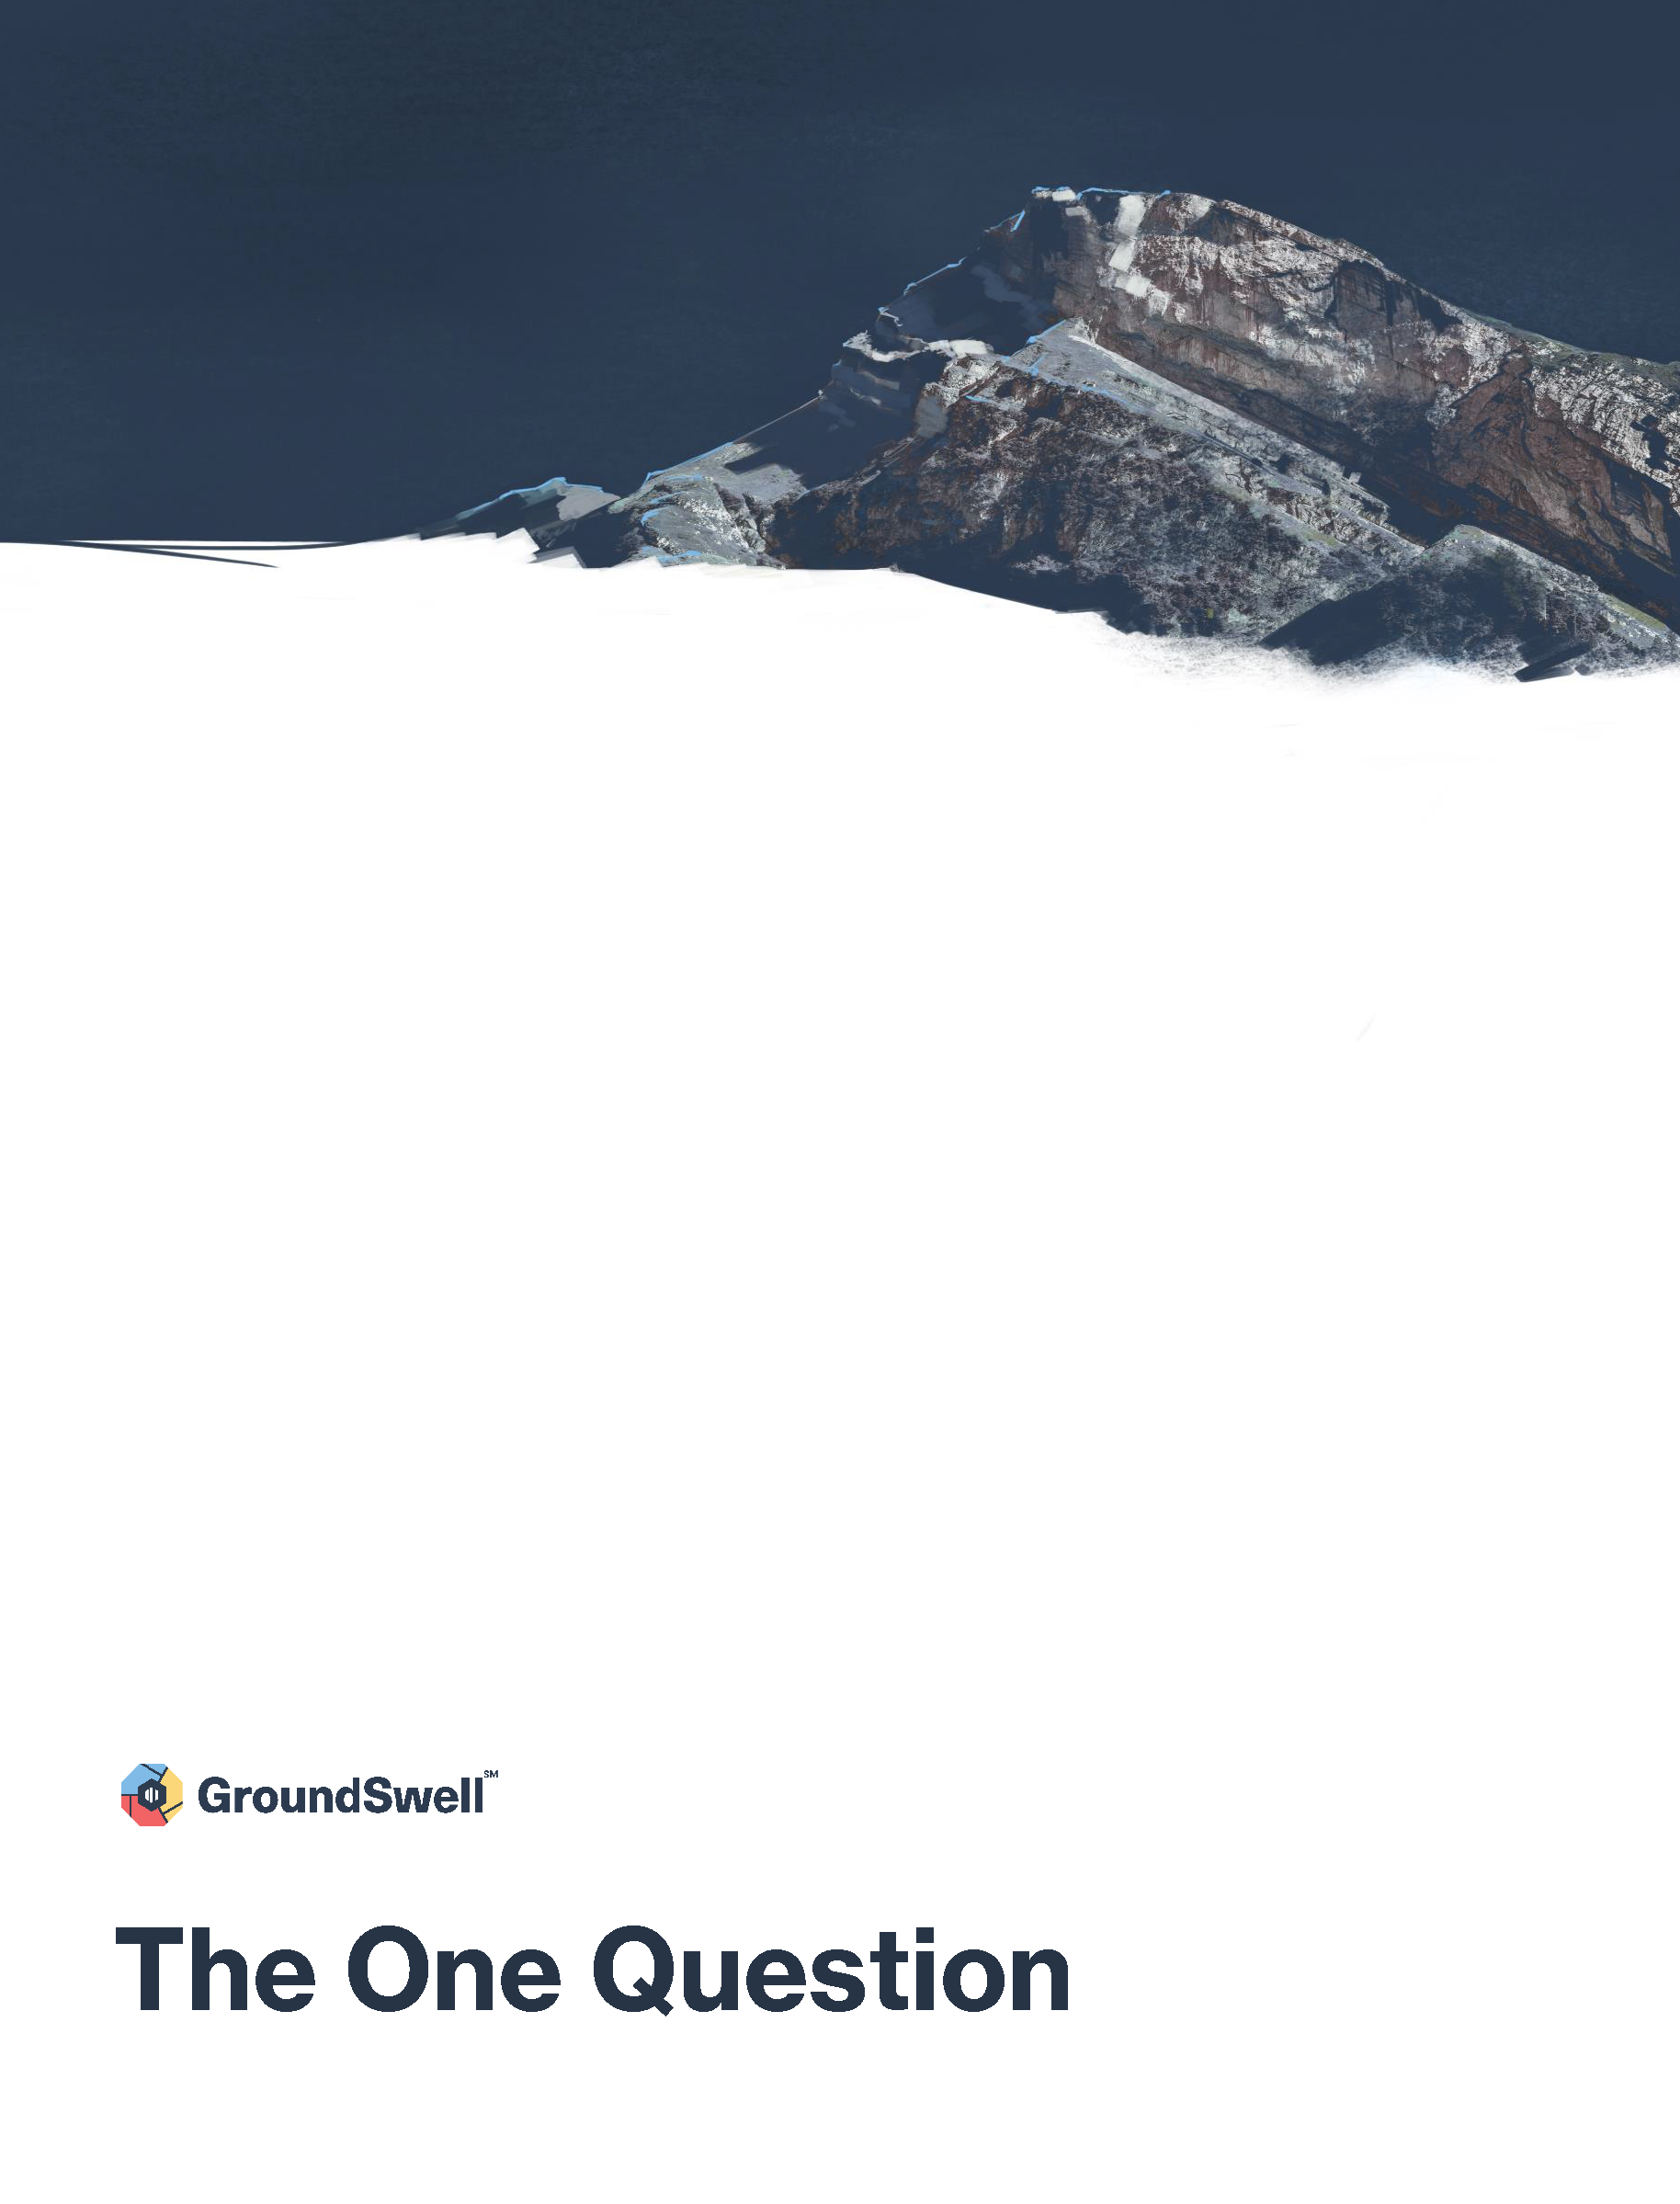 Cover page of document with snow covered mountains in the background